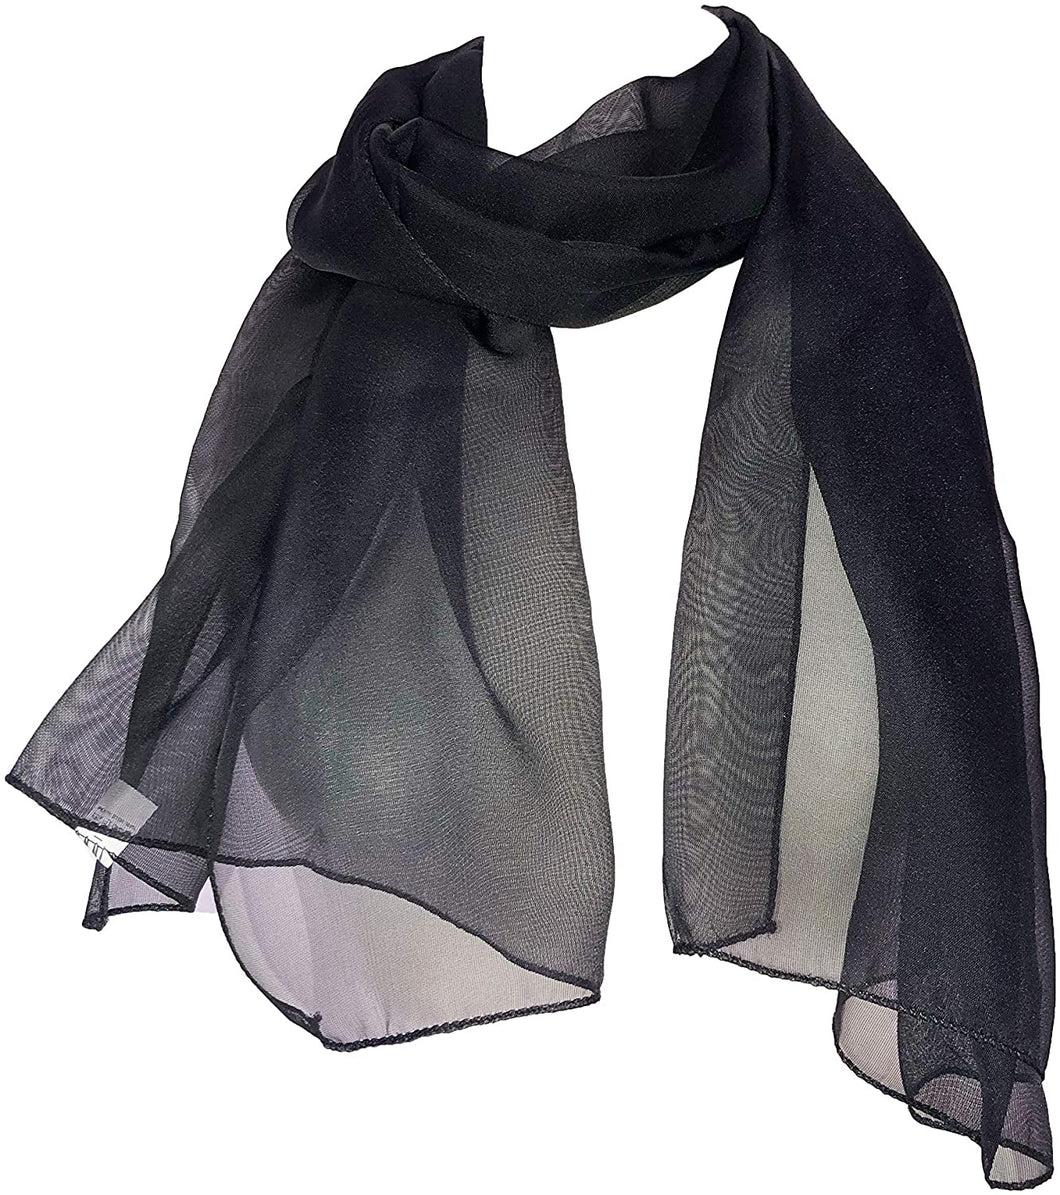 Plain Black Chiffon Style Scarf Thin Pretty Scarf Great for Any Outfit Lovely Gift